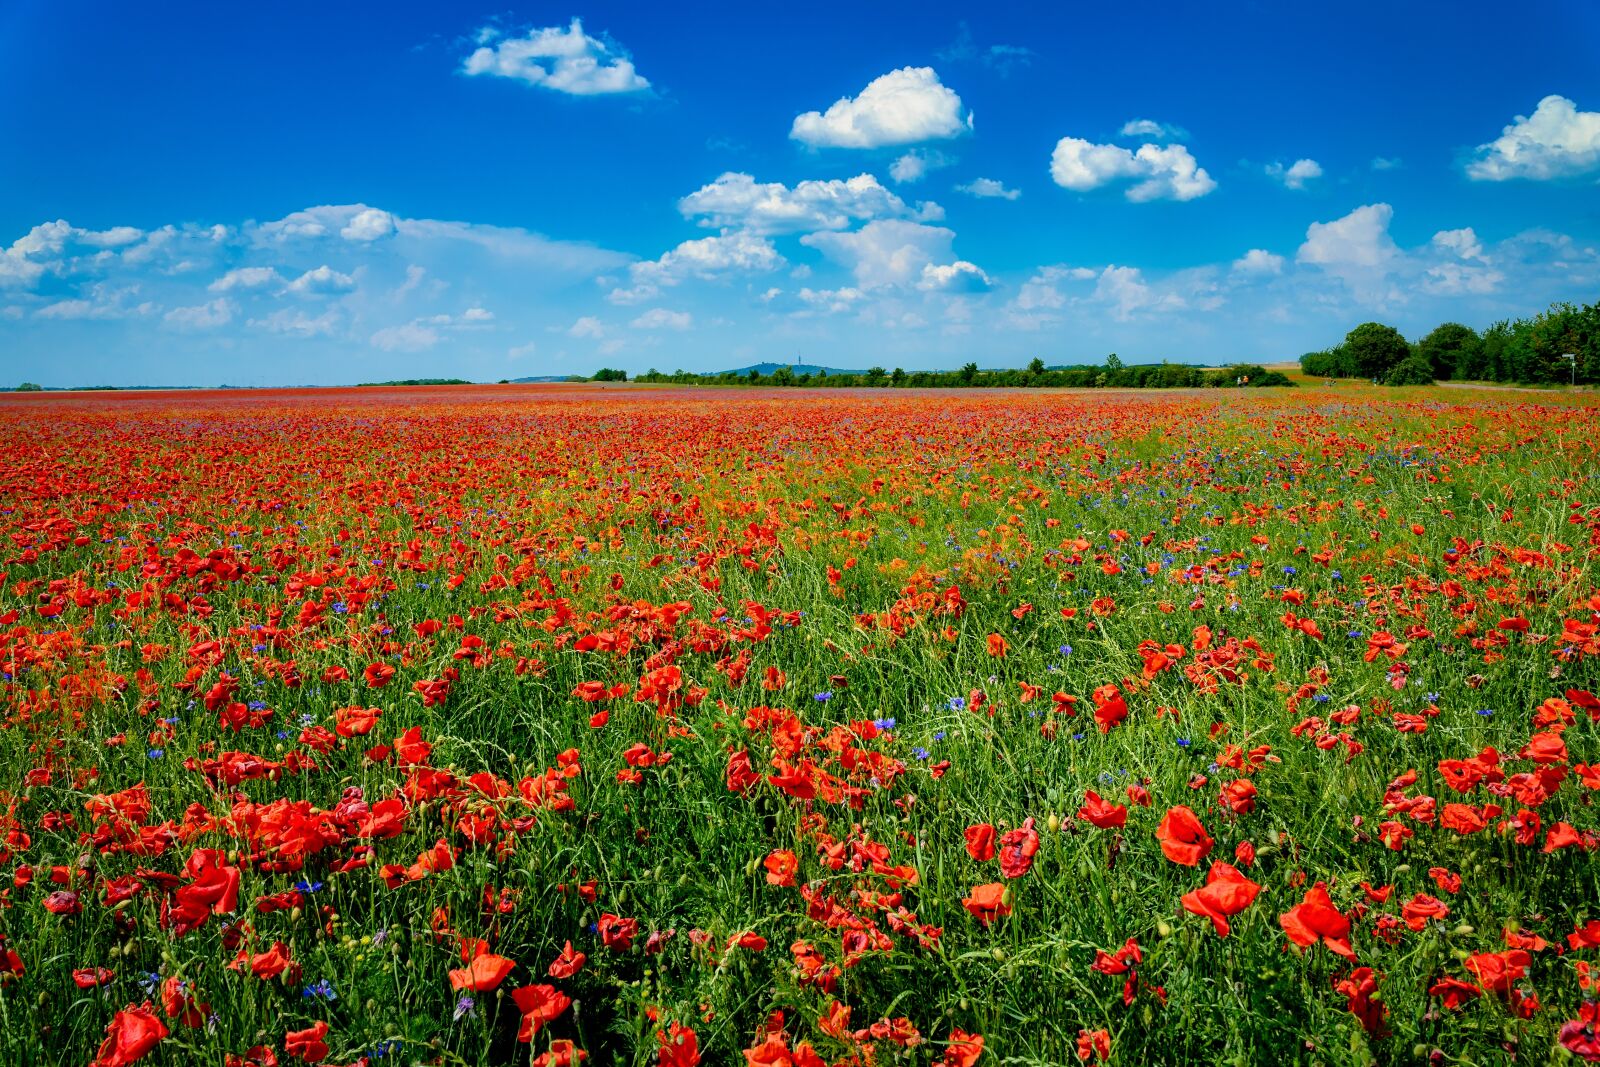 Sony a7 II sample photo. Field of poppies, meadow photography